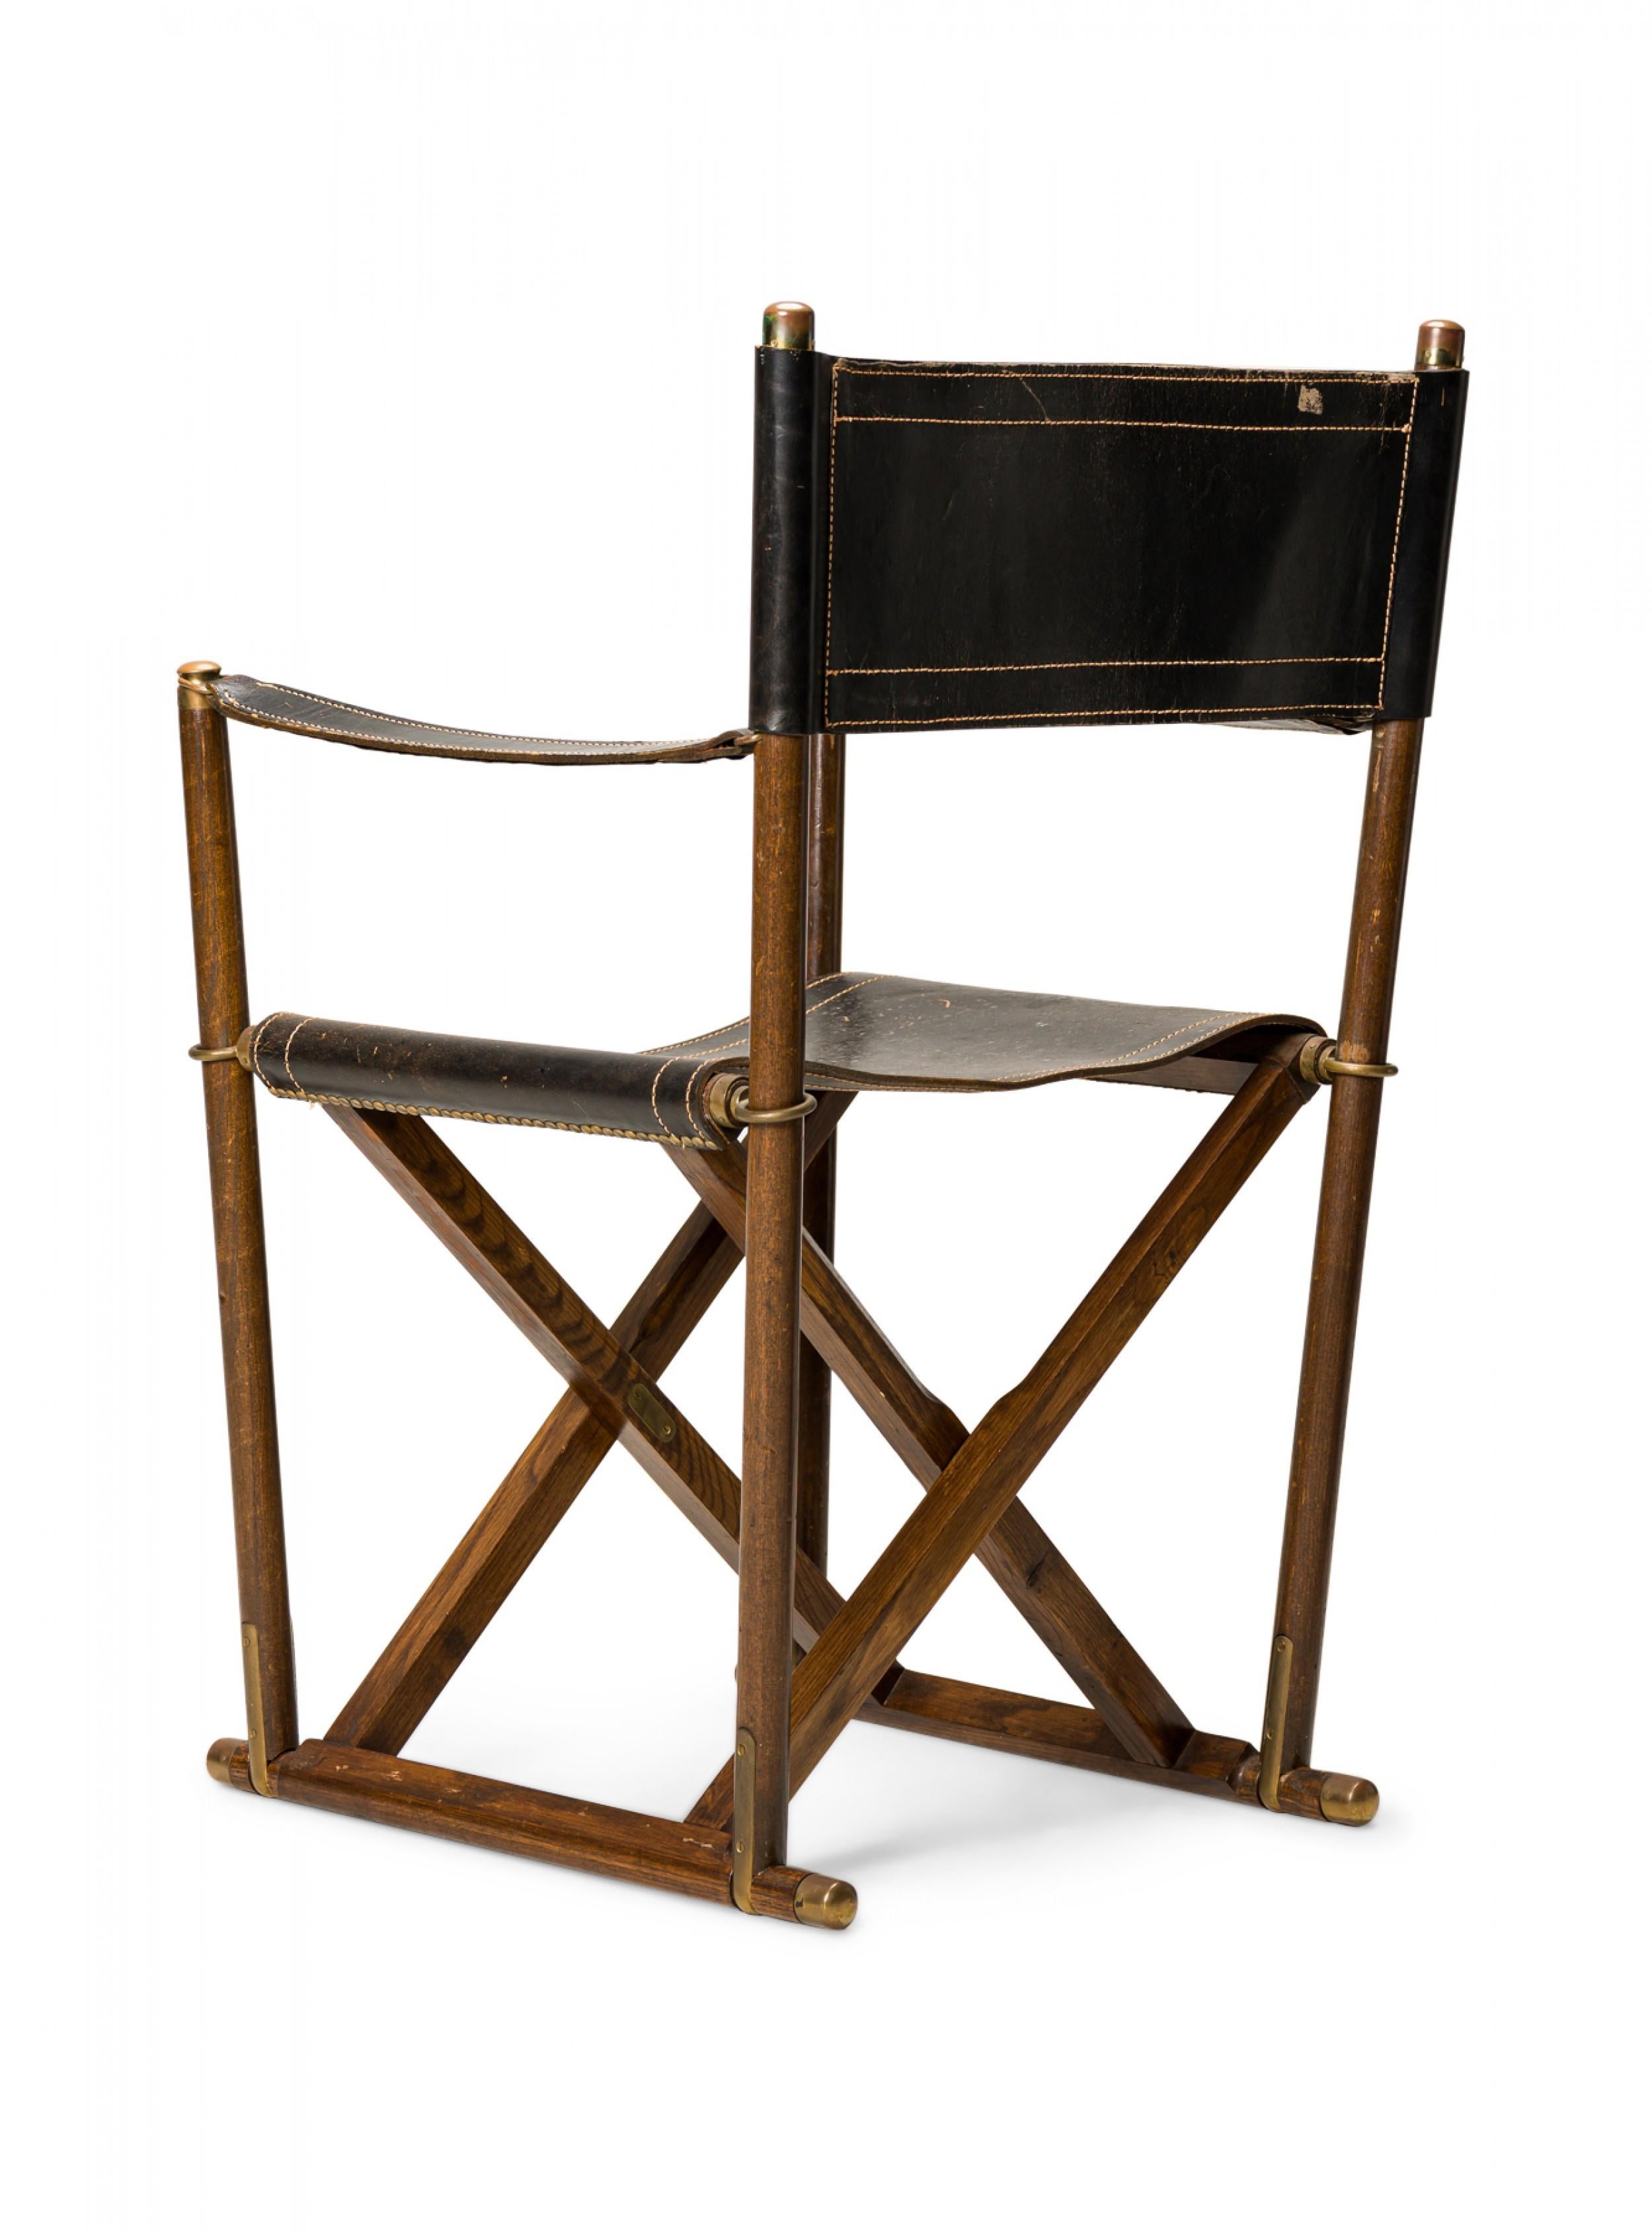 American Pair of Sarreid Black Leather and Walnut Folding Campaign / Director's Chairs For Sale